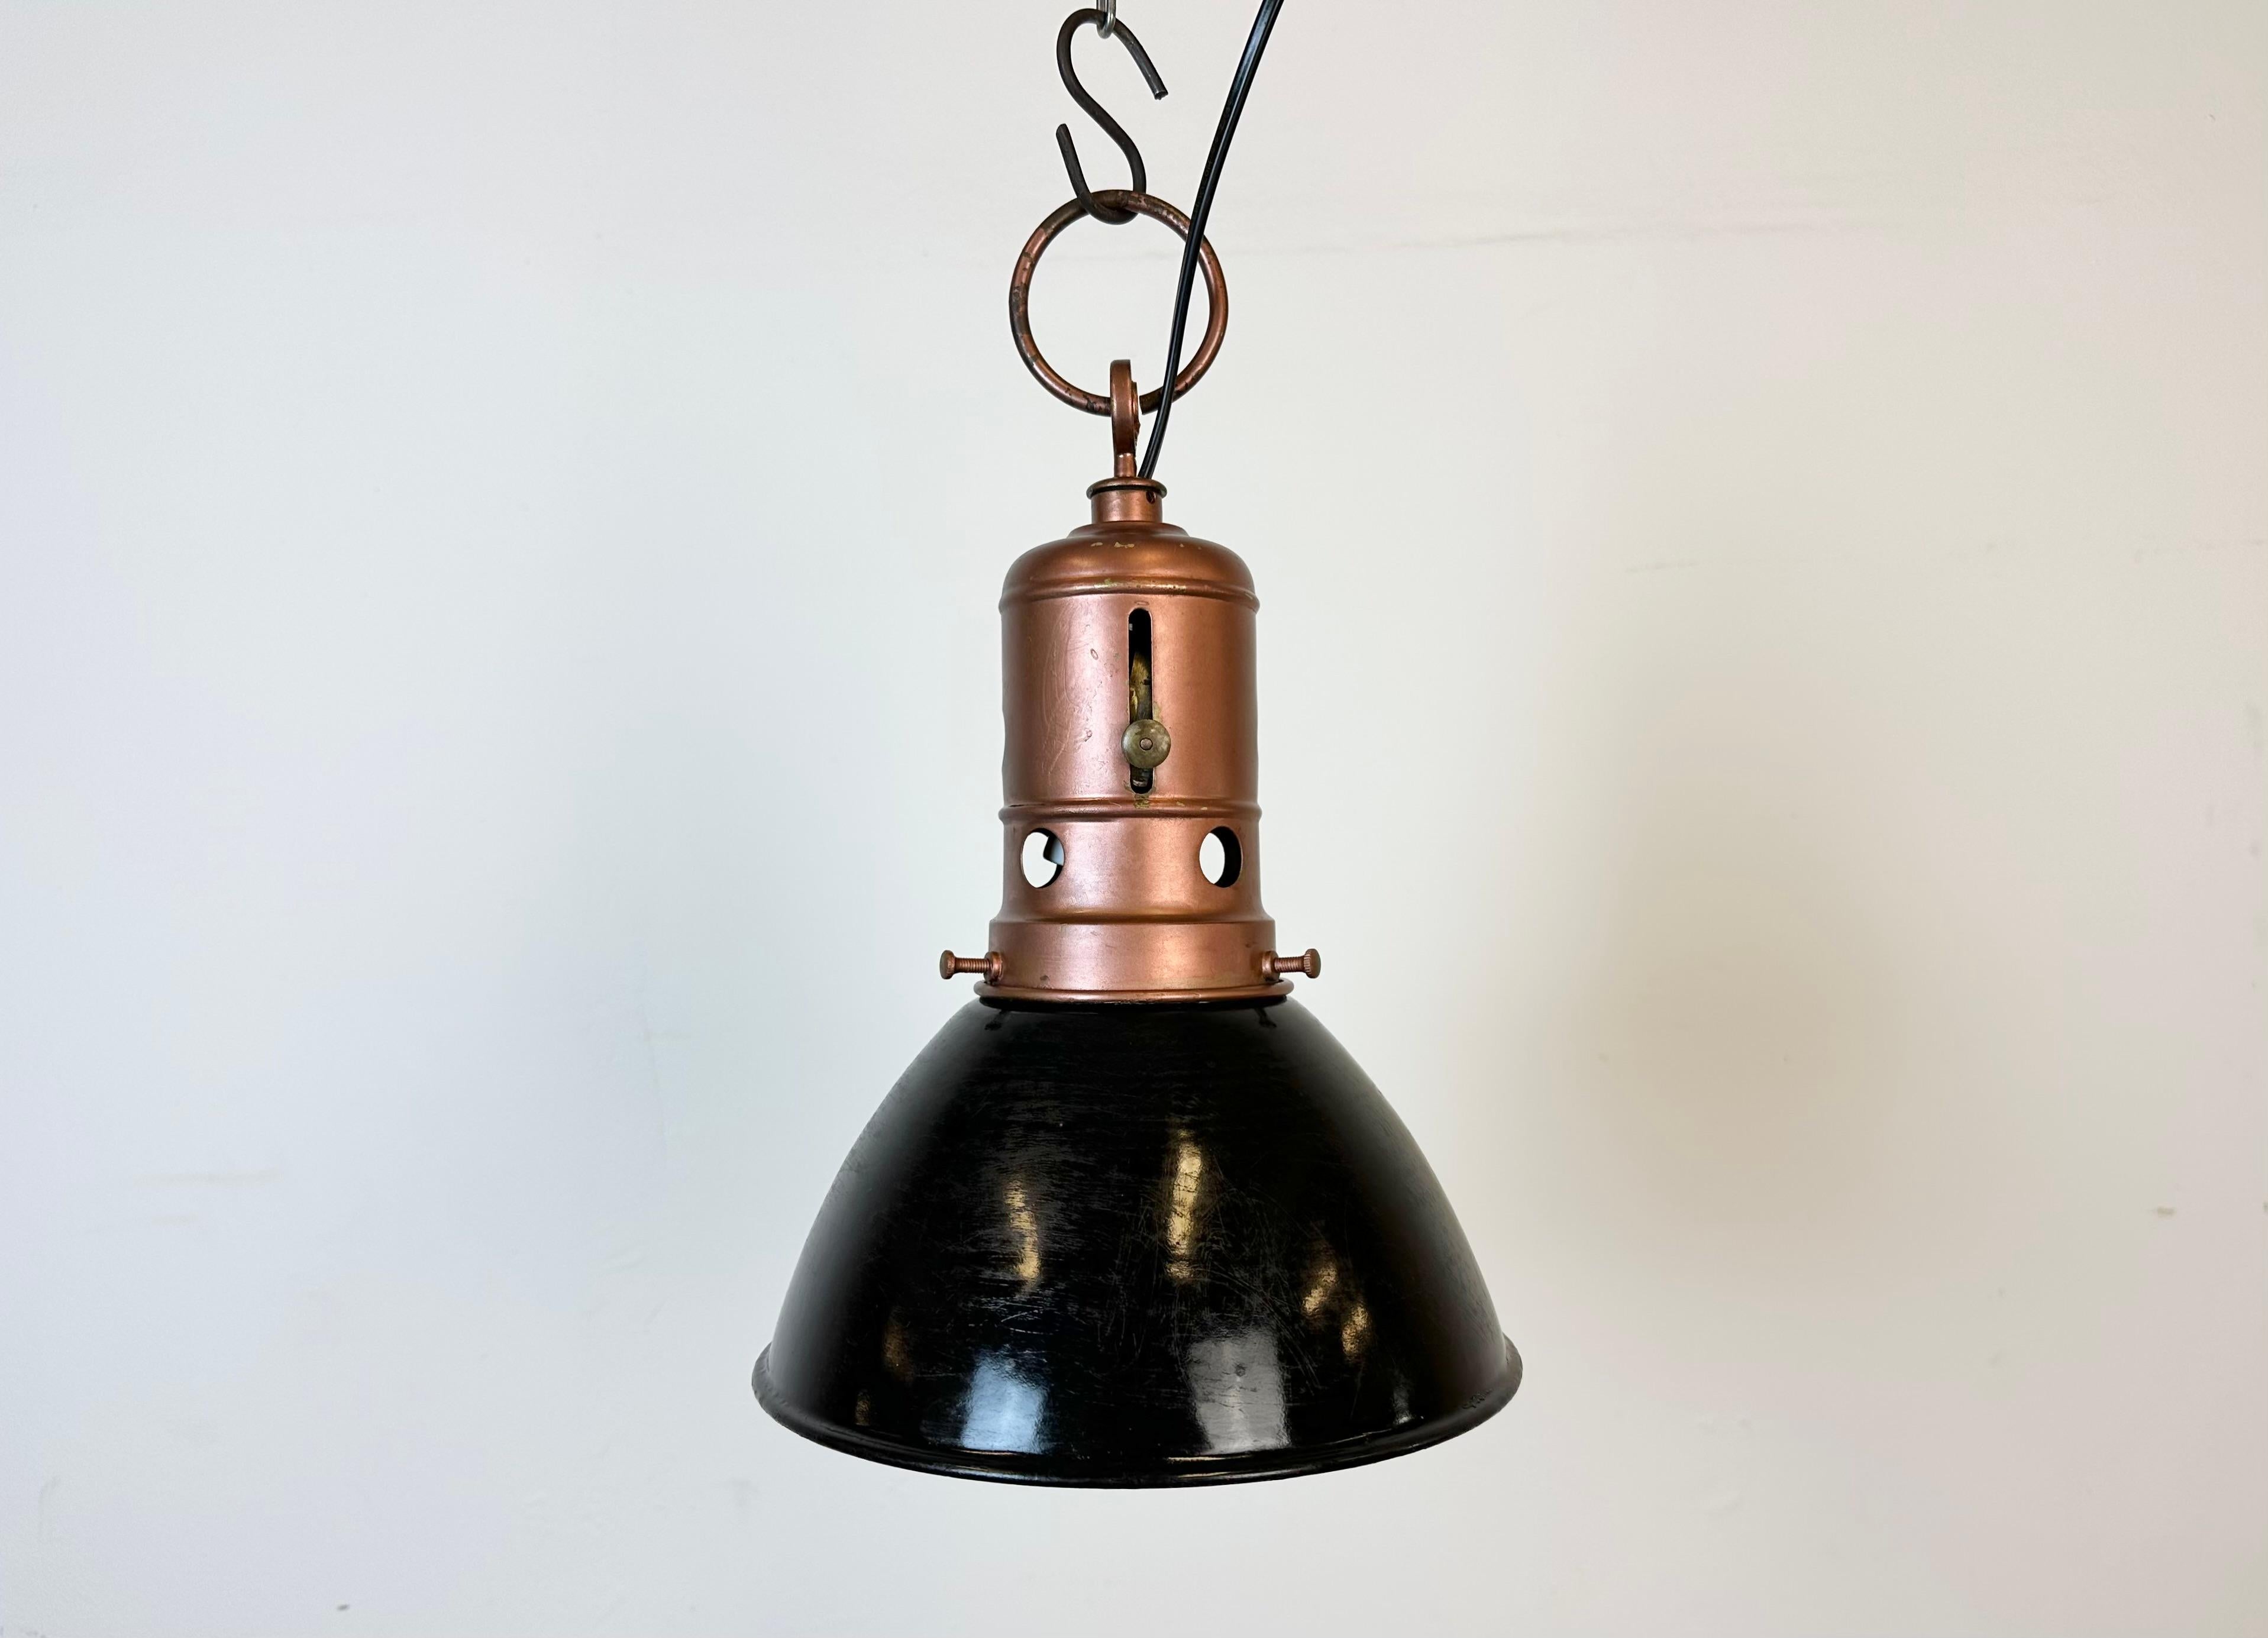 Industrial black enamel factory pendant light made in Italy during the 1950s. White enamel inside the shade. Iron top in copper color. The porcelain socket requires standard E 27/ E26 light bulbs. New wire. The weight of the lamp is 0,9 kg.The